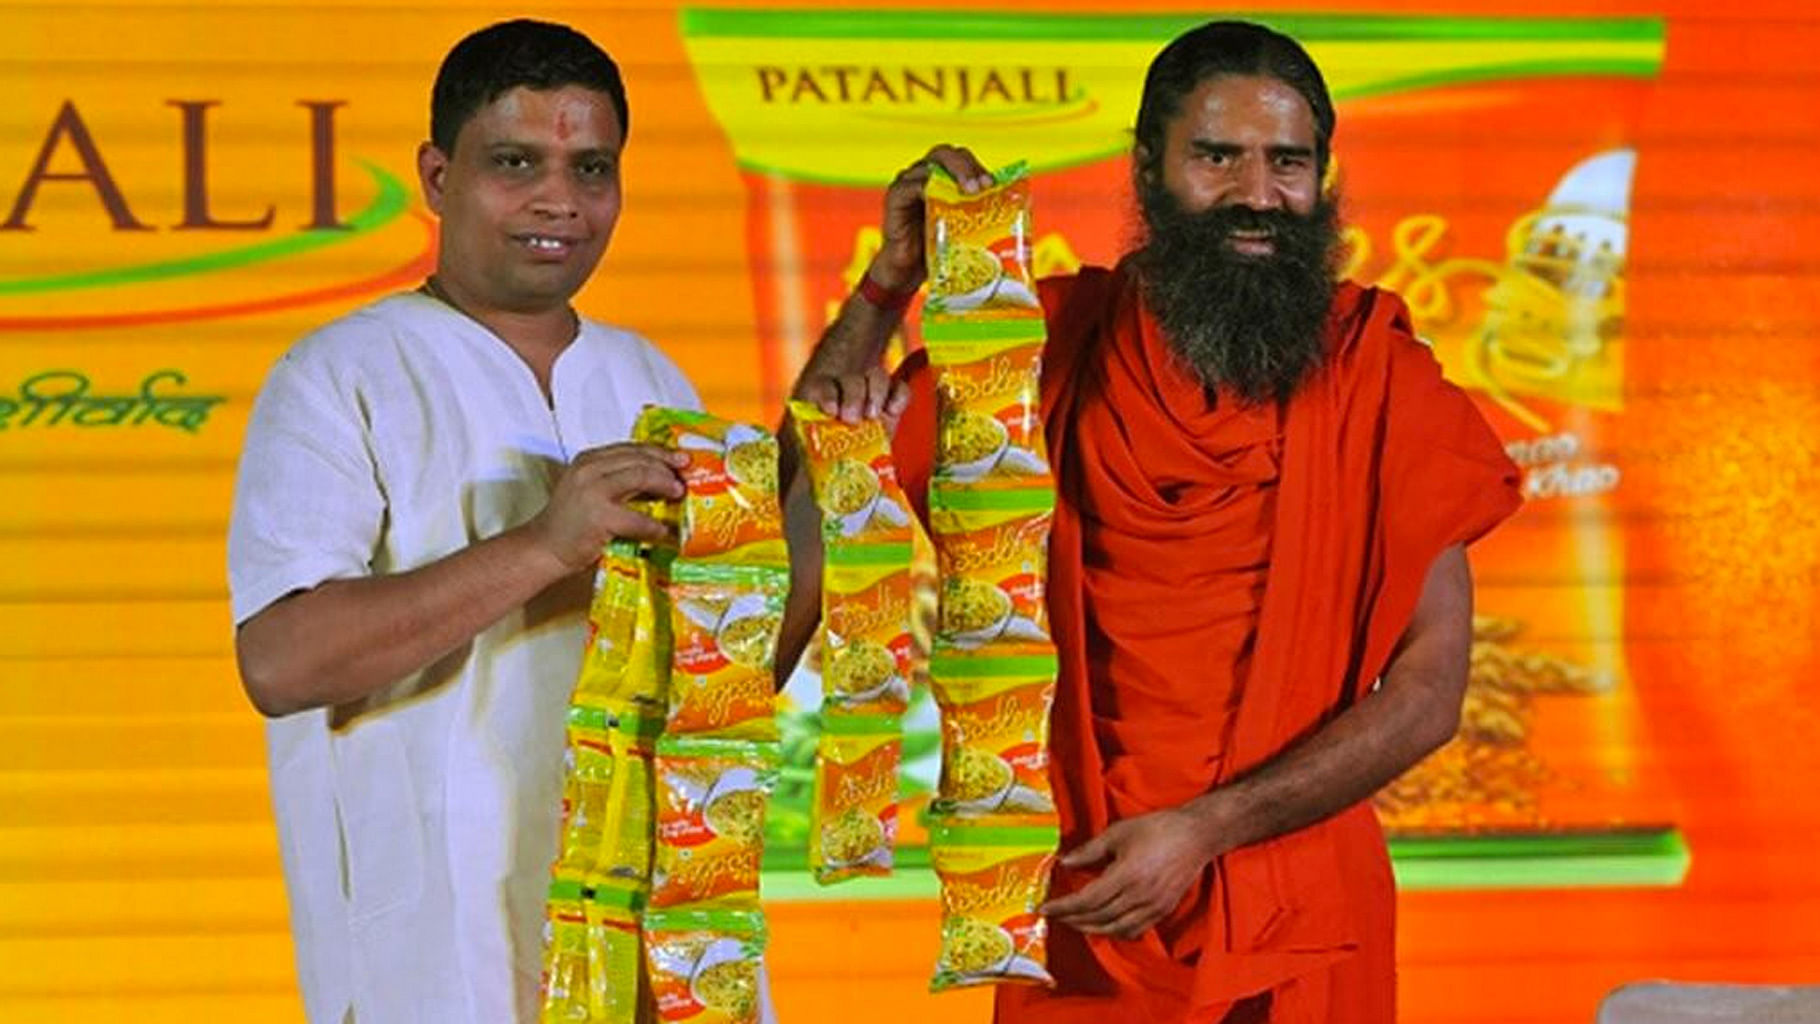 15 percent of the company’s sales are expected to come from online platforms in the future, said Ramdev.